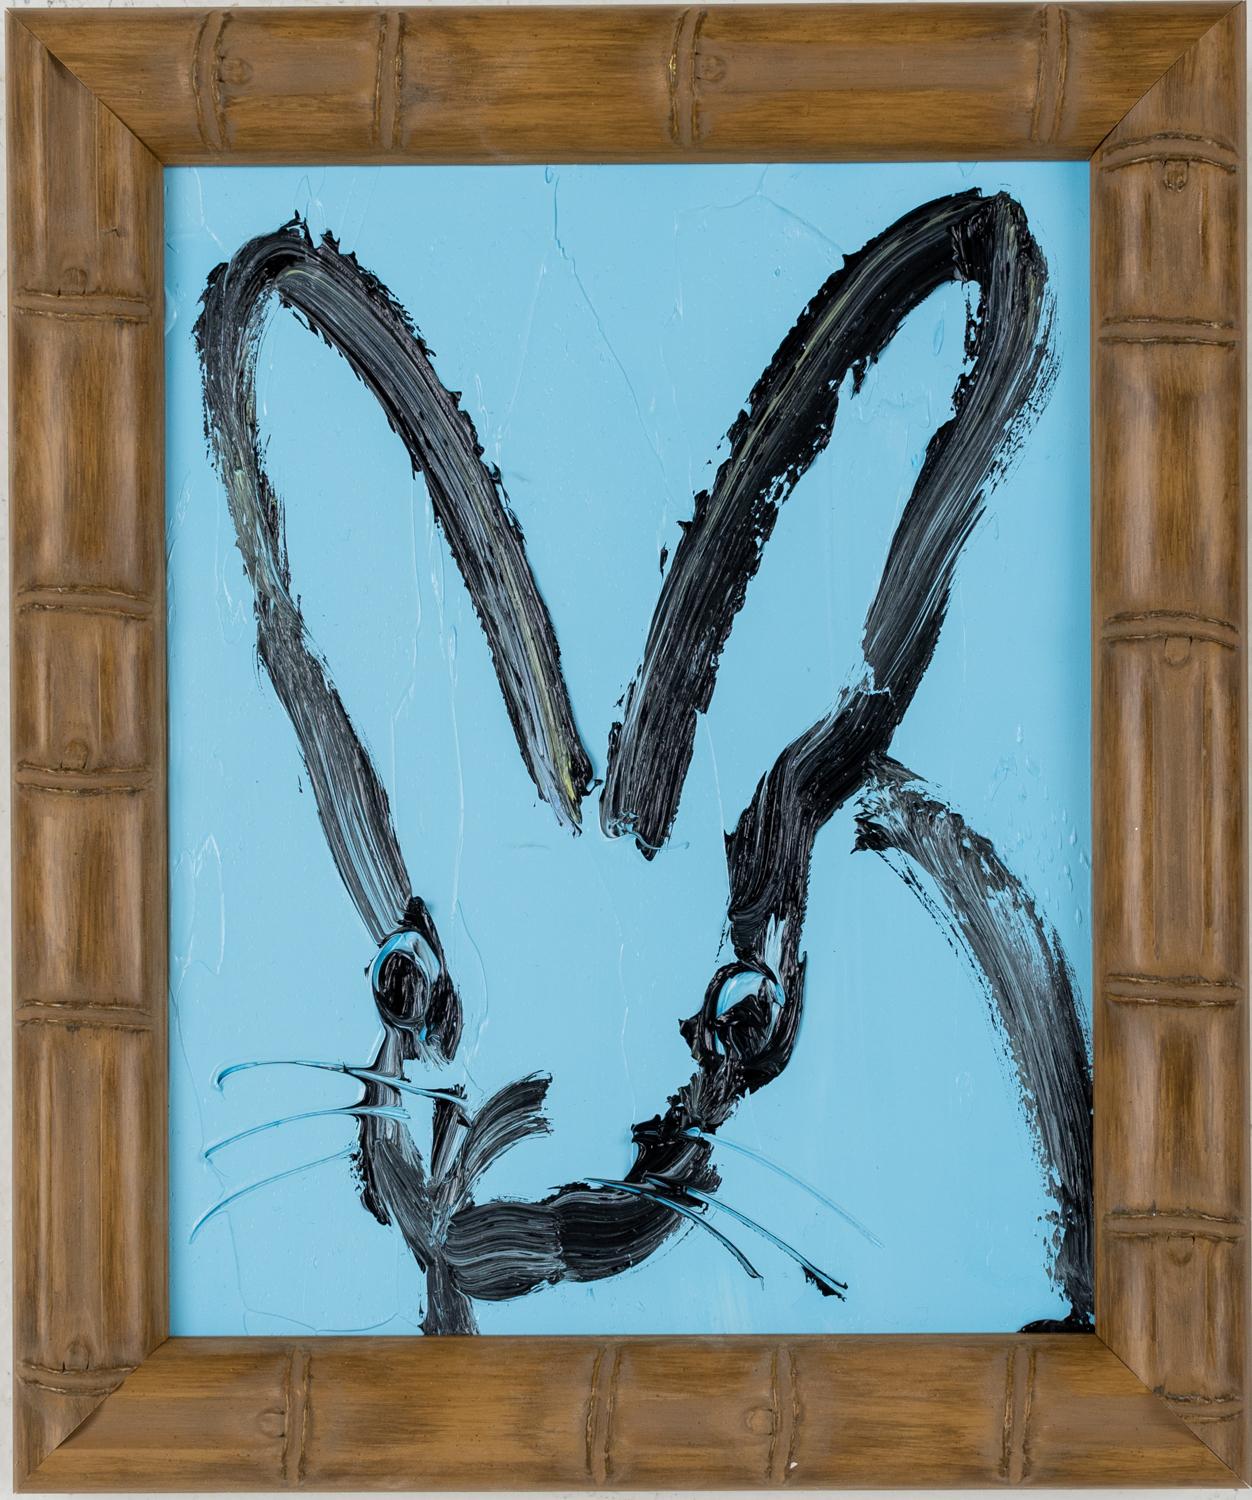 Hunt Slonem "Bamboo" Blue Bunny
Black outlined bunny on a blue background in an antique frame

Unframed: 10 x 8 inches
Framed: 12.5 x 10.5 inches
*Painting is framed - Please note Hunt Slonem paintings with frames may show signs of patina due to age